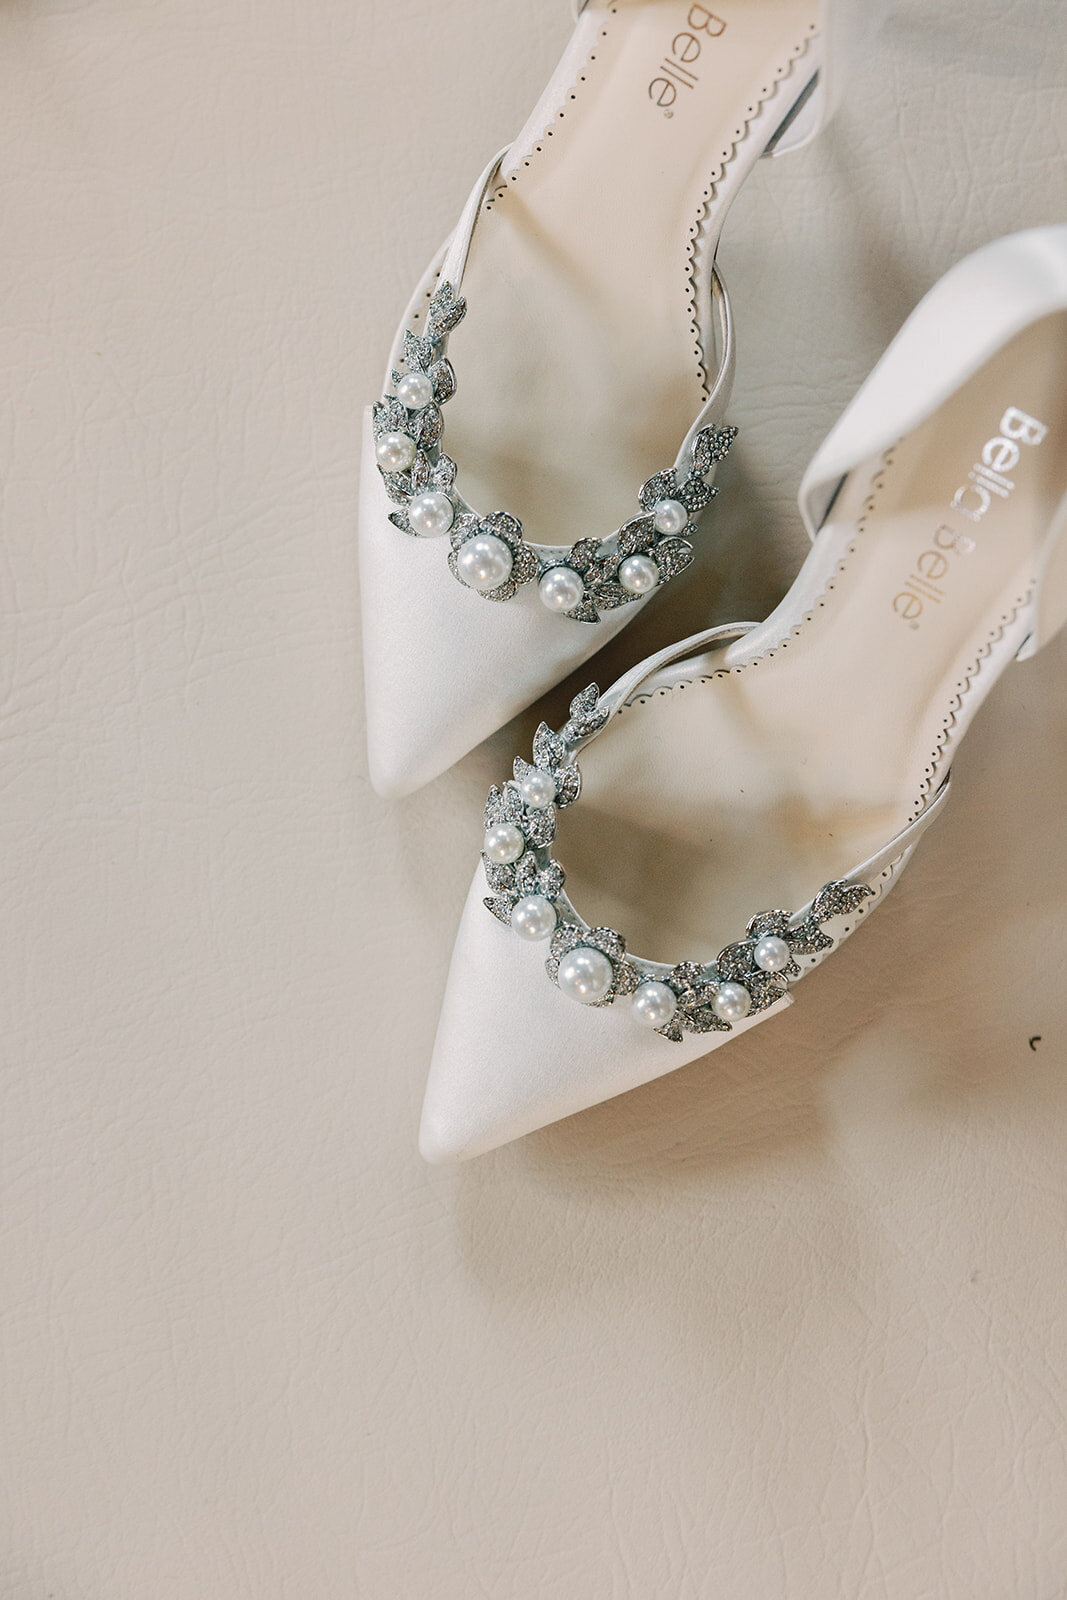 White pointed heels with pearls and rhinestones